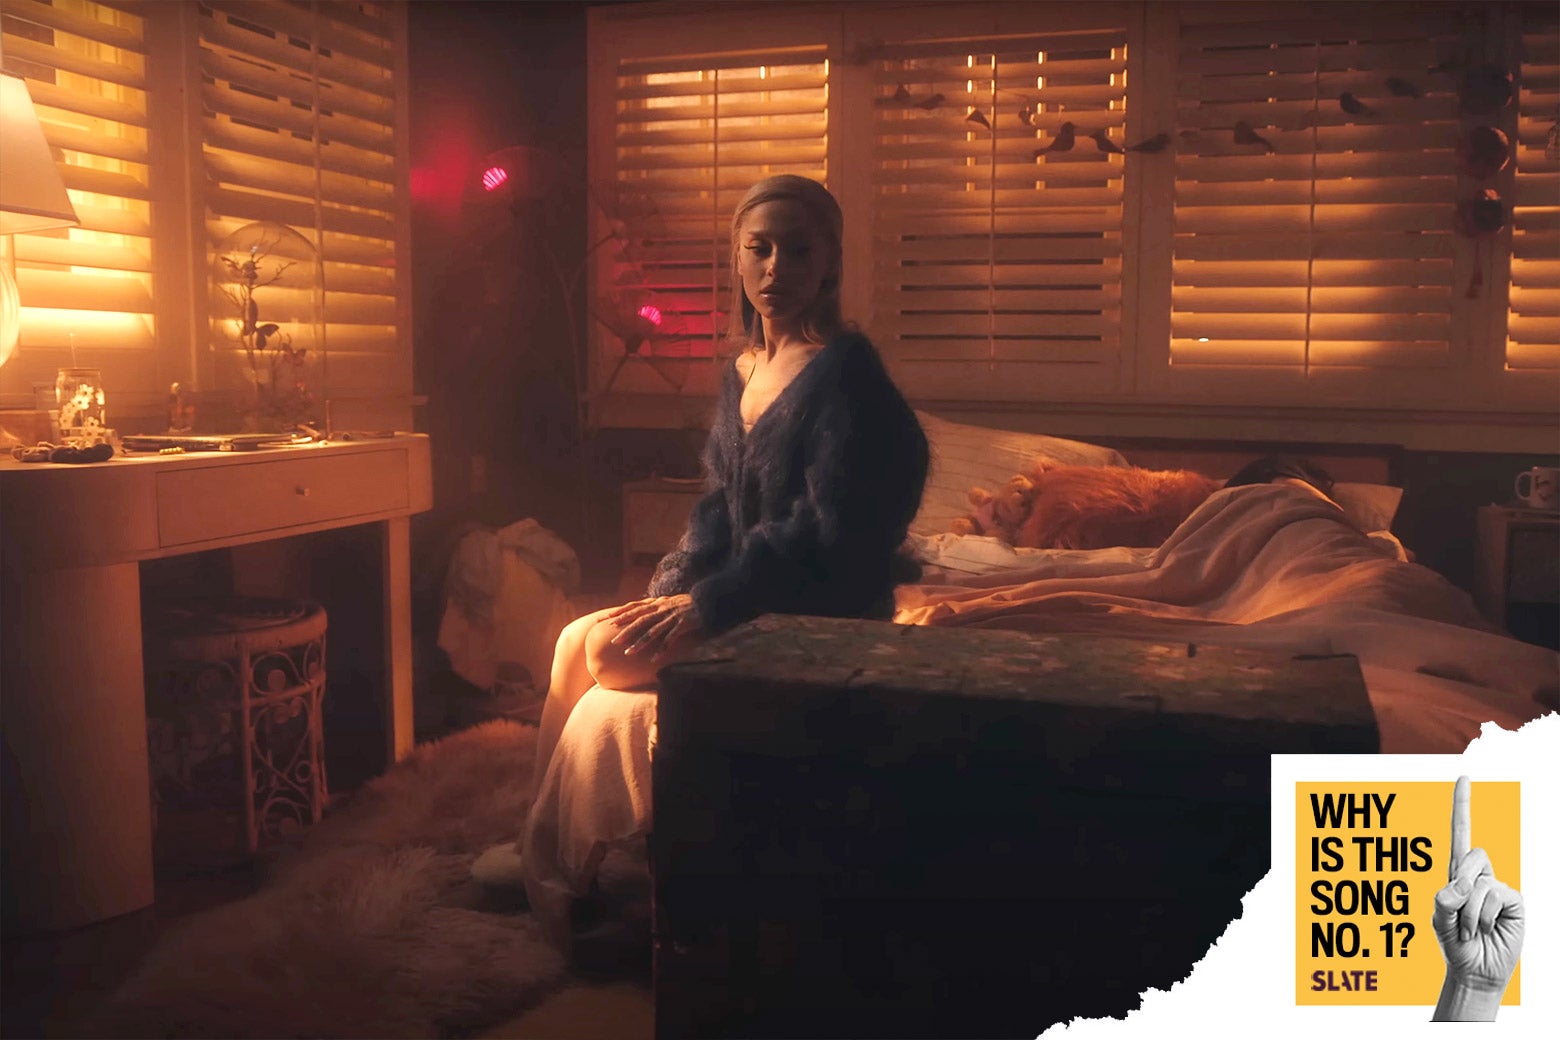 A still shows the singer sitting on the side of the bed in the morning light with another figure still asleep behind her. In the corner a logo reads 